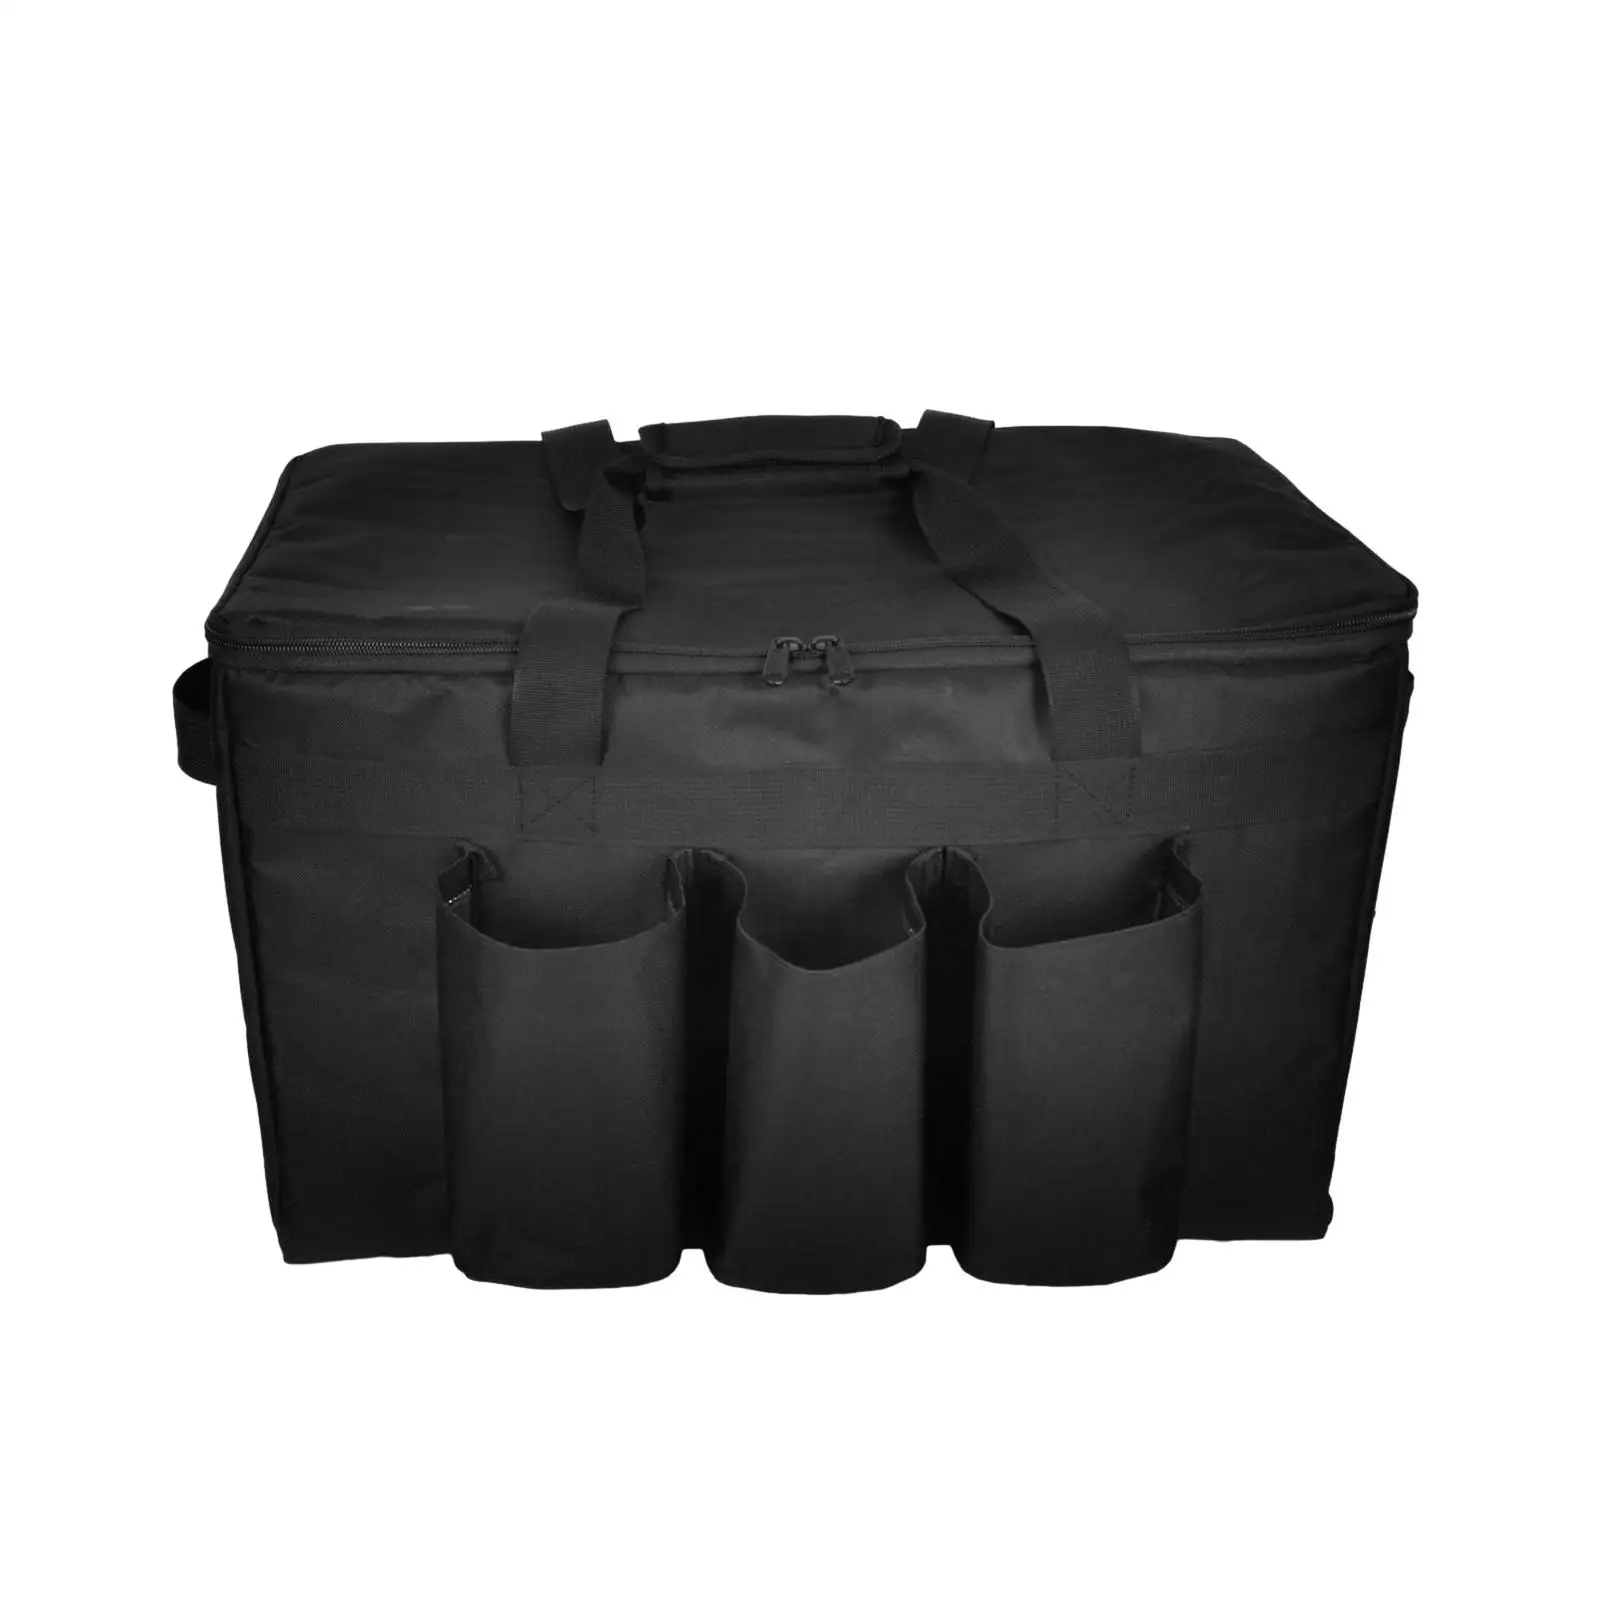 Insulated Food Delivery Bag Portable Cup Holder Insulated Picnic Bag for Outdoor Personal Restaurant Shopping Camping